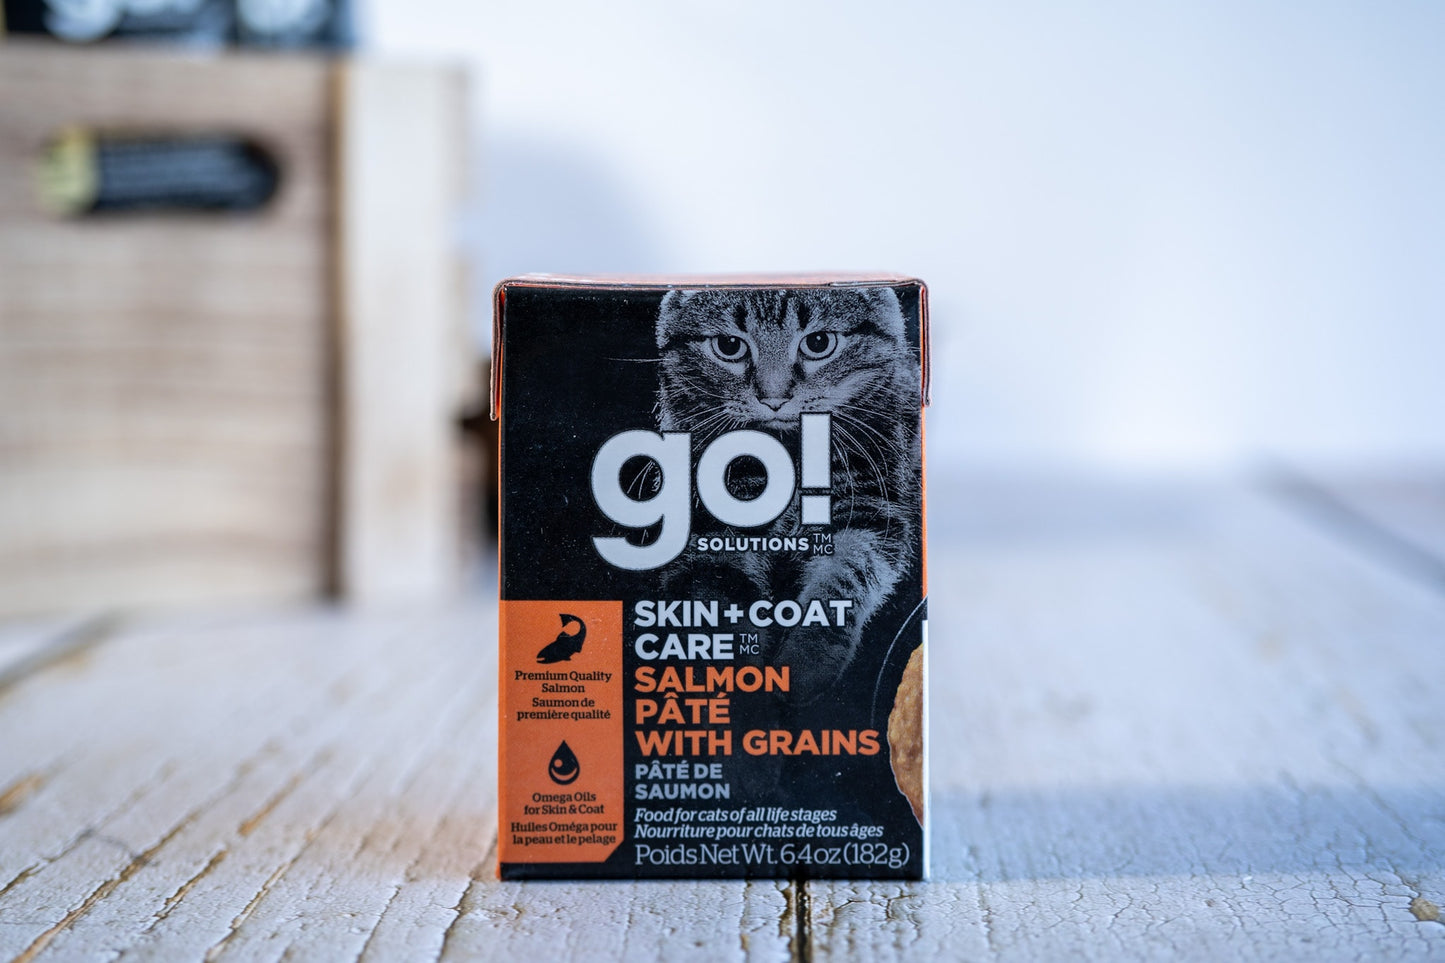 Salmon pâté for cats of all life stages from Go Solutions!